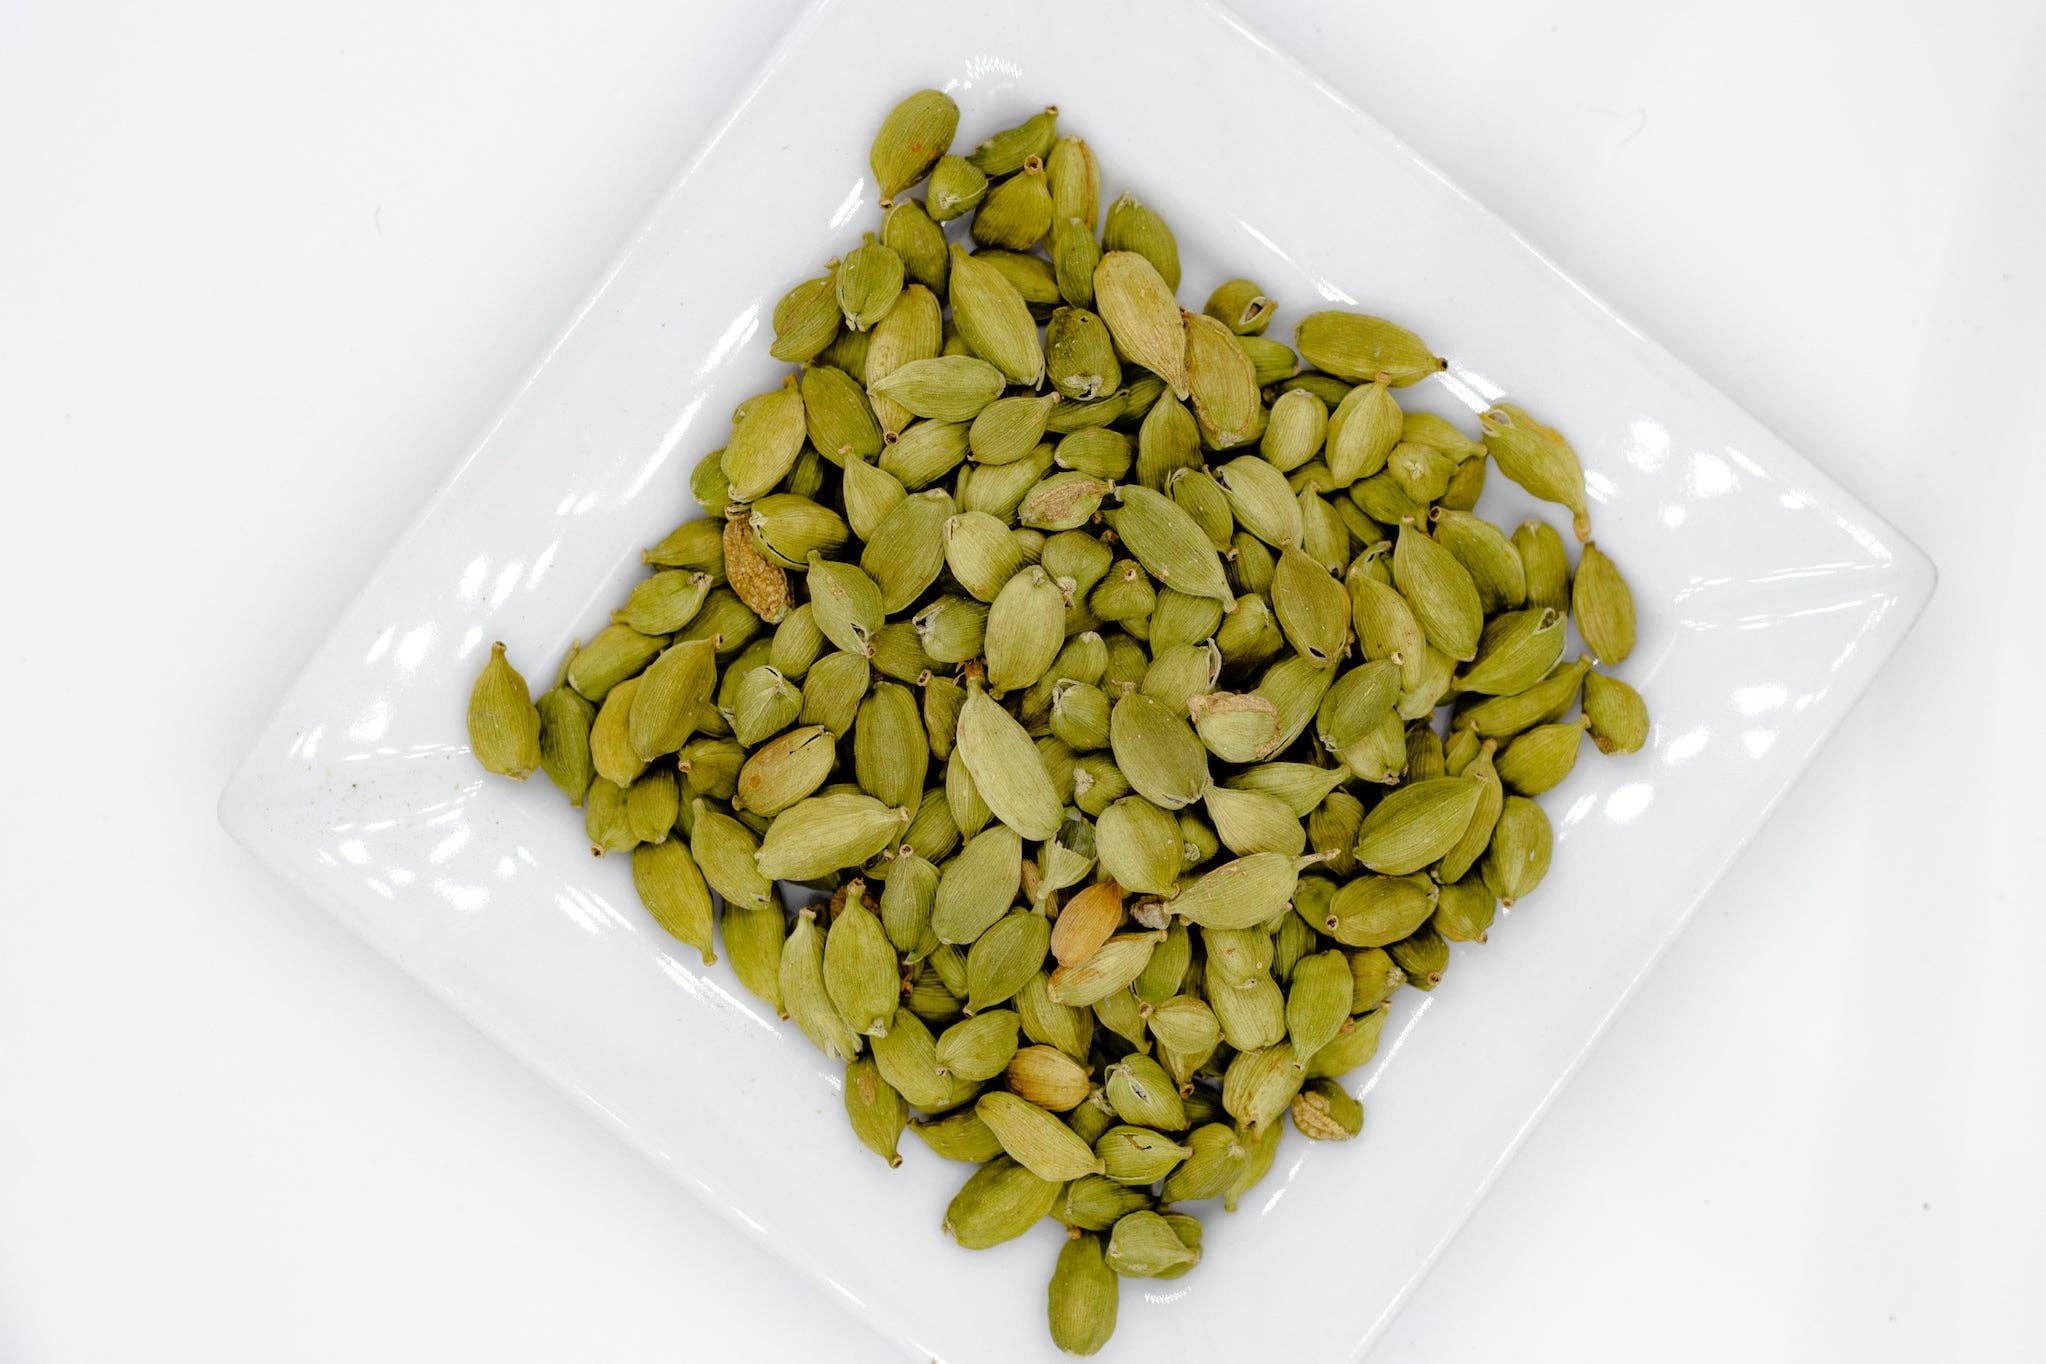 Wholesale Cardamom for your store - Faire